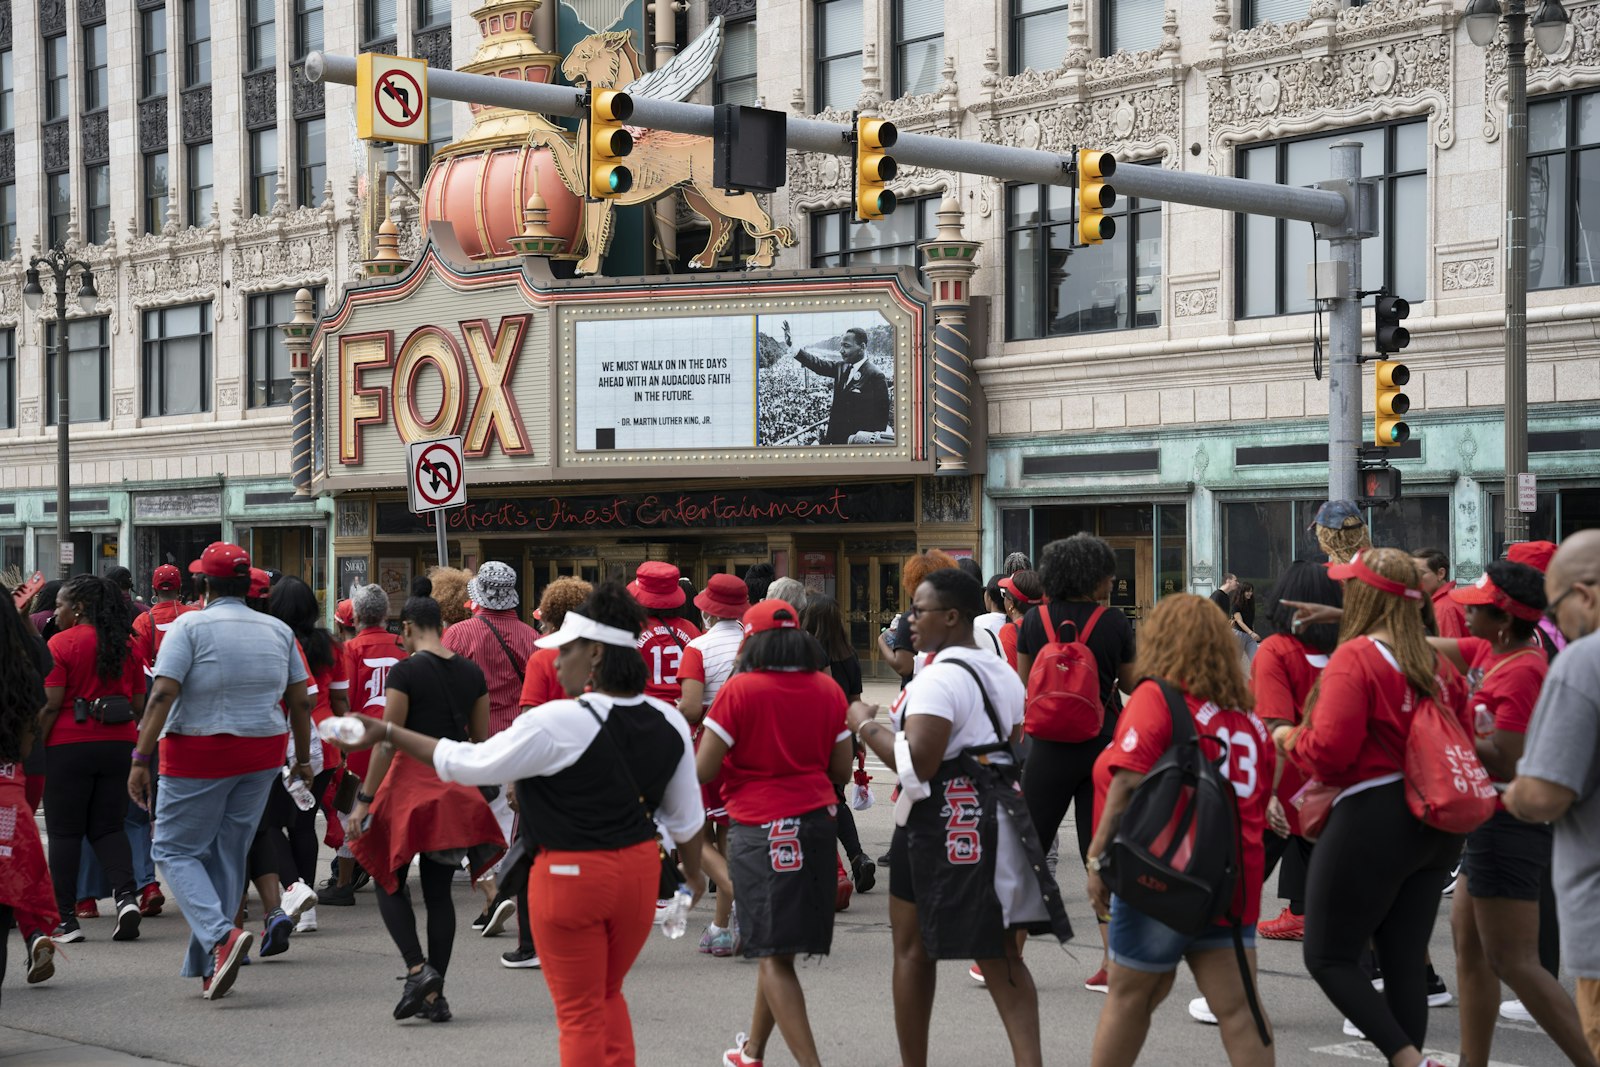 Detroiters march past the Fox Theatre on Woodward Avenue on their way to Hart Plaza in downtown Detroit to mark the 60th anniversary of the Rev. Martin Luther King Jr.'s famous "I Have a Dream" speech, which he first delivered in Detroit in 1963.